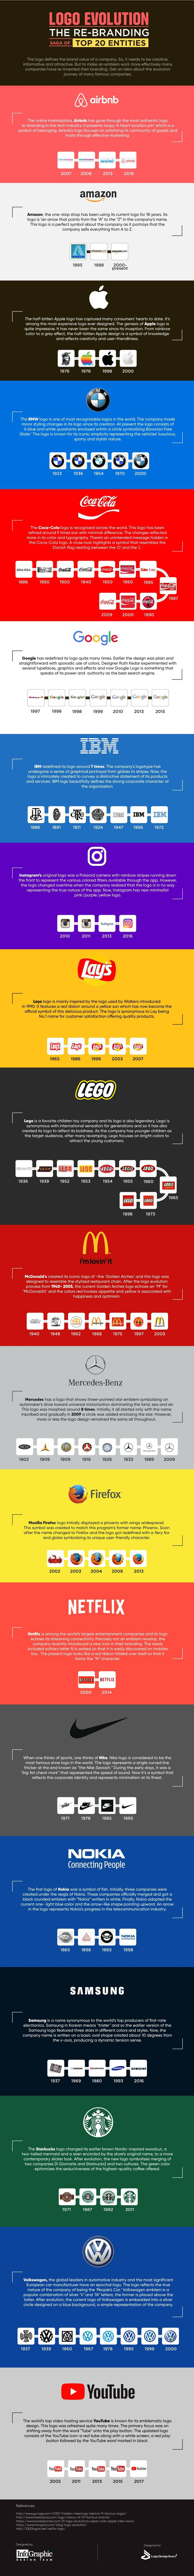 Red Check Mark Company Logo - Logo Evolution of 20 Famous Companies - Infographic